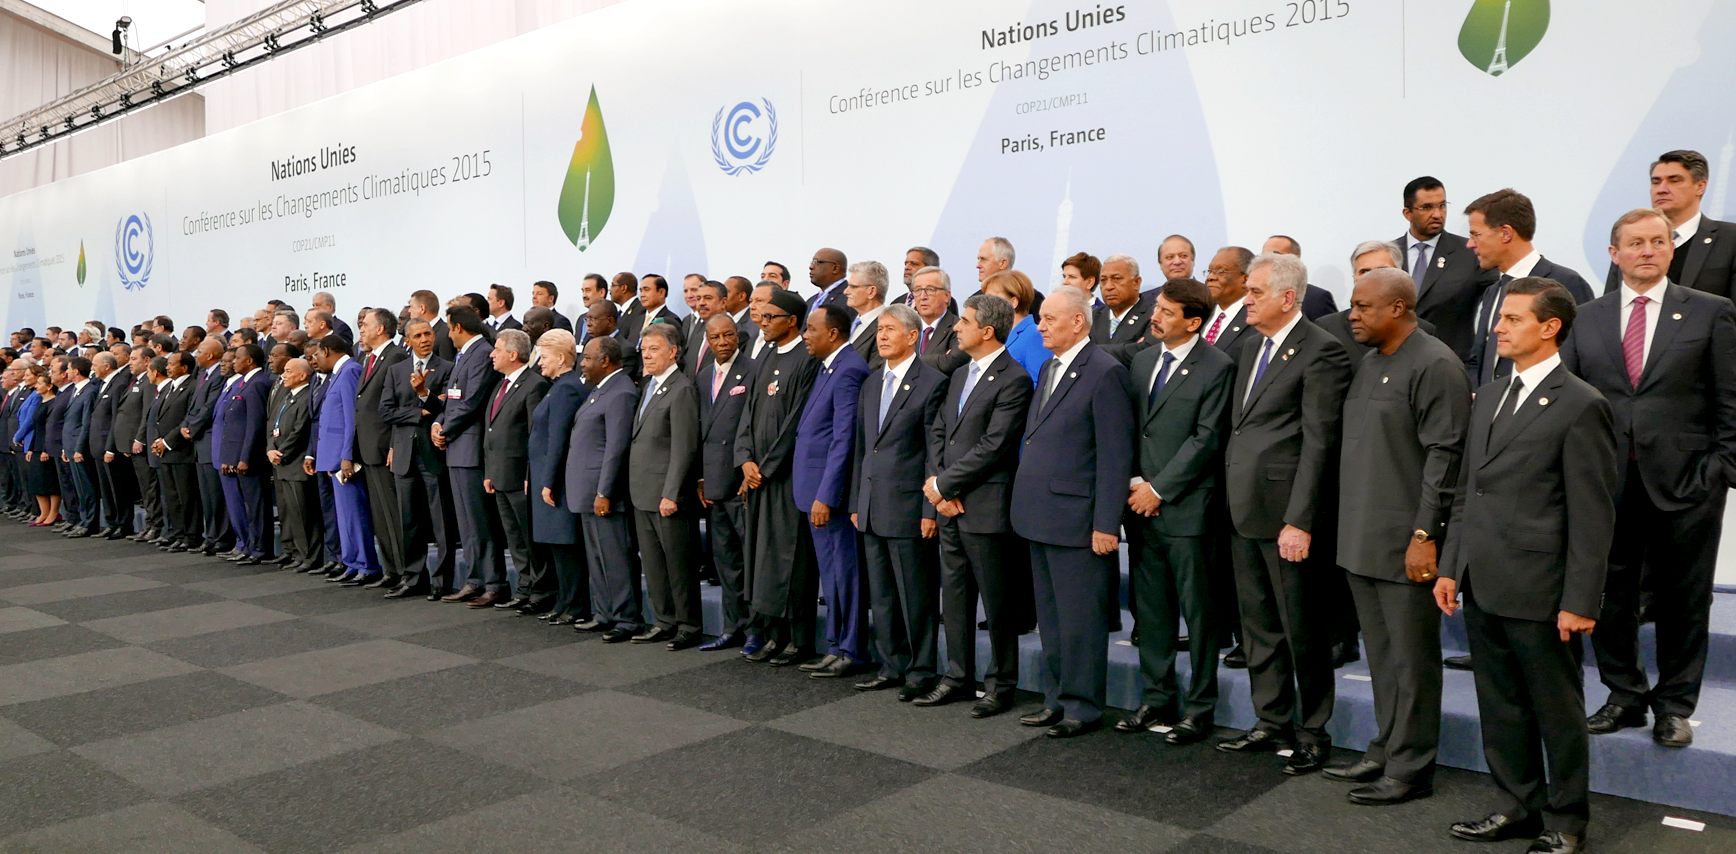 UN climate conference of the parties